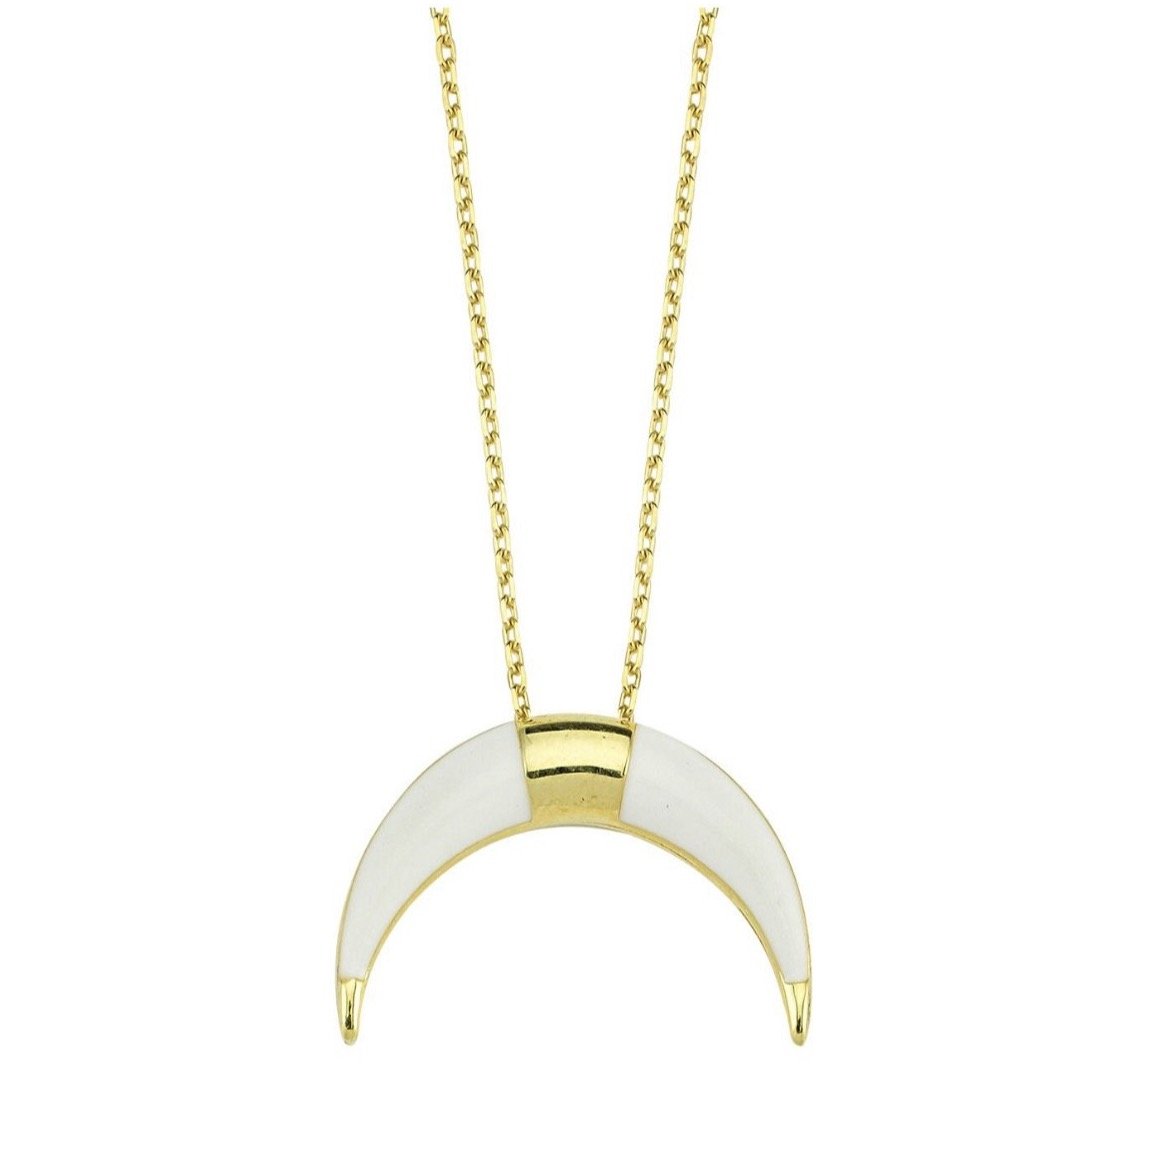 White Enamel Horn Necklace JEWELRY The Sis Kiss